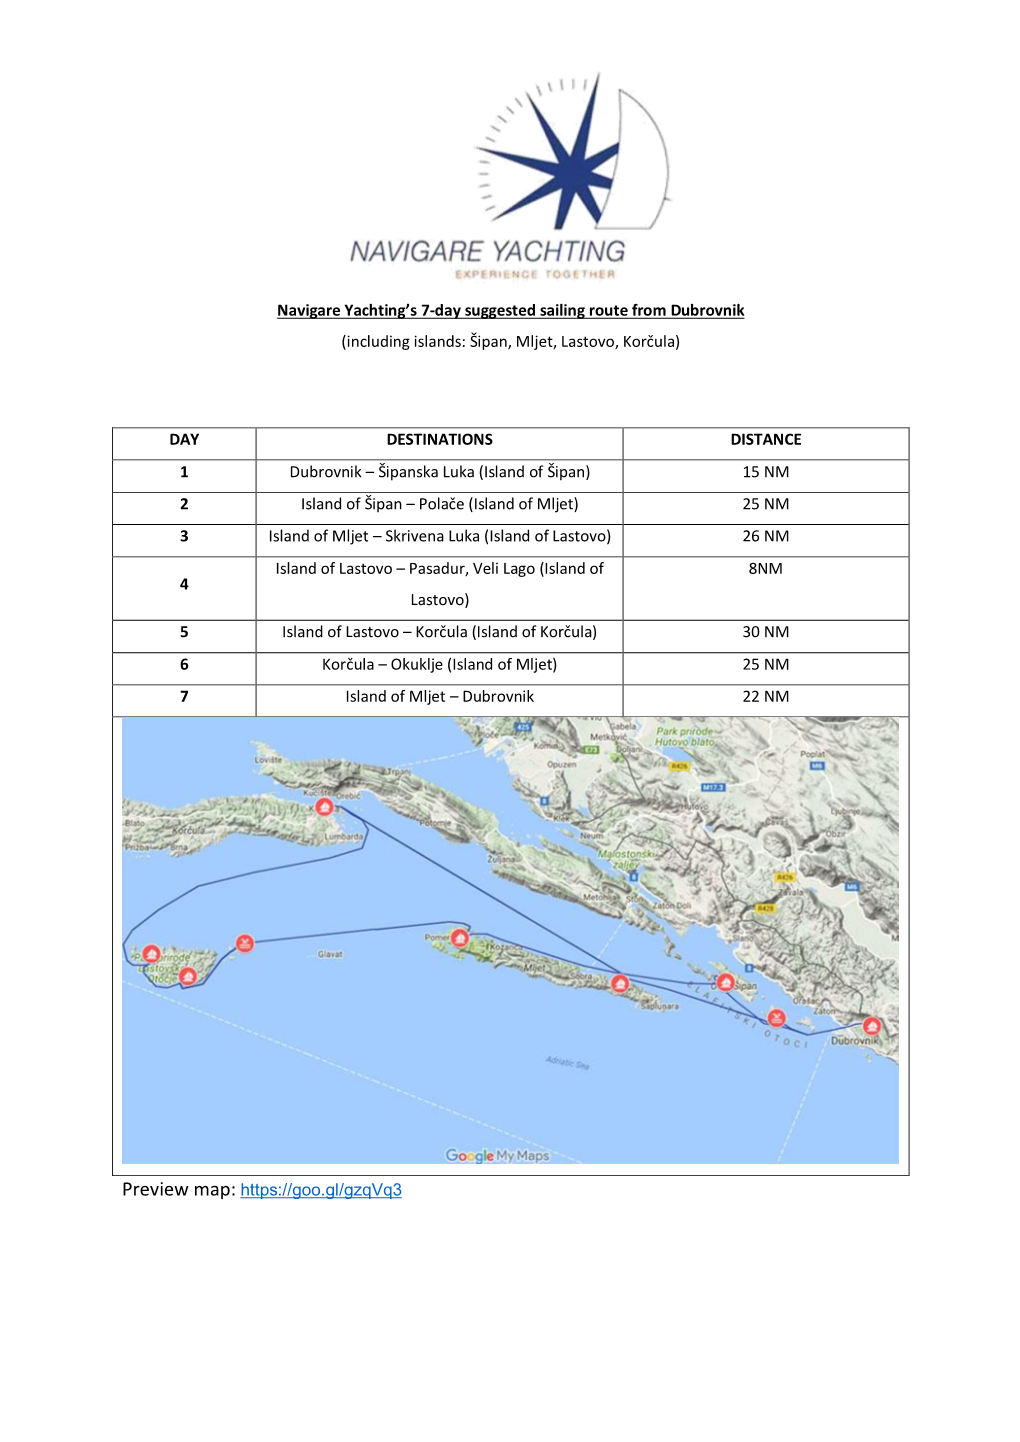 Navigare Yachting's 7-Day Suggested Sailing Route from Dubrovnik